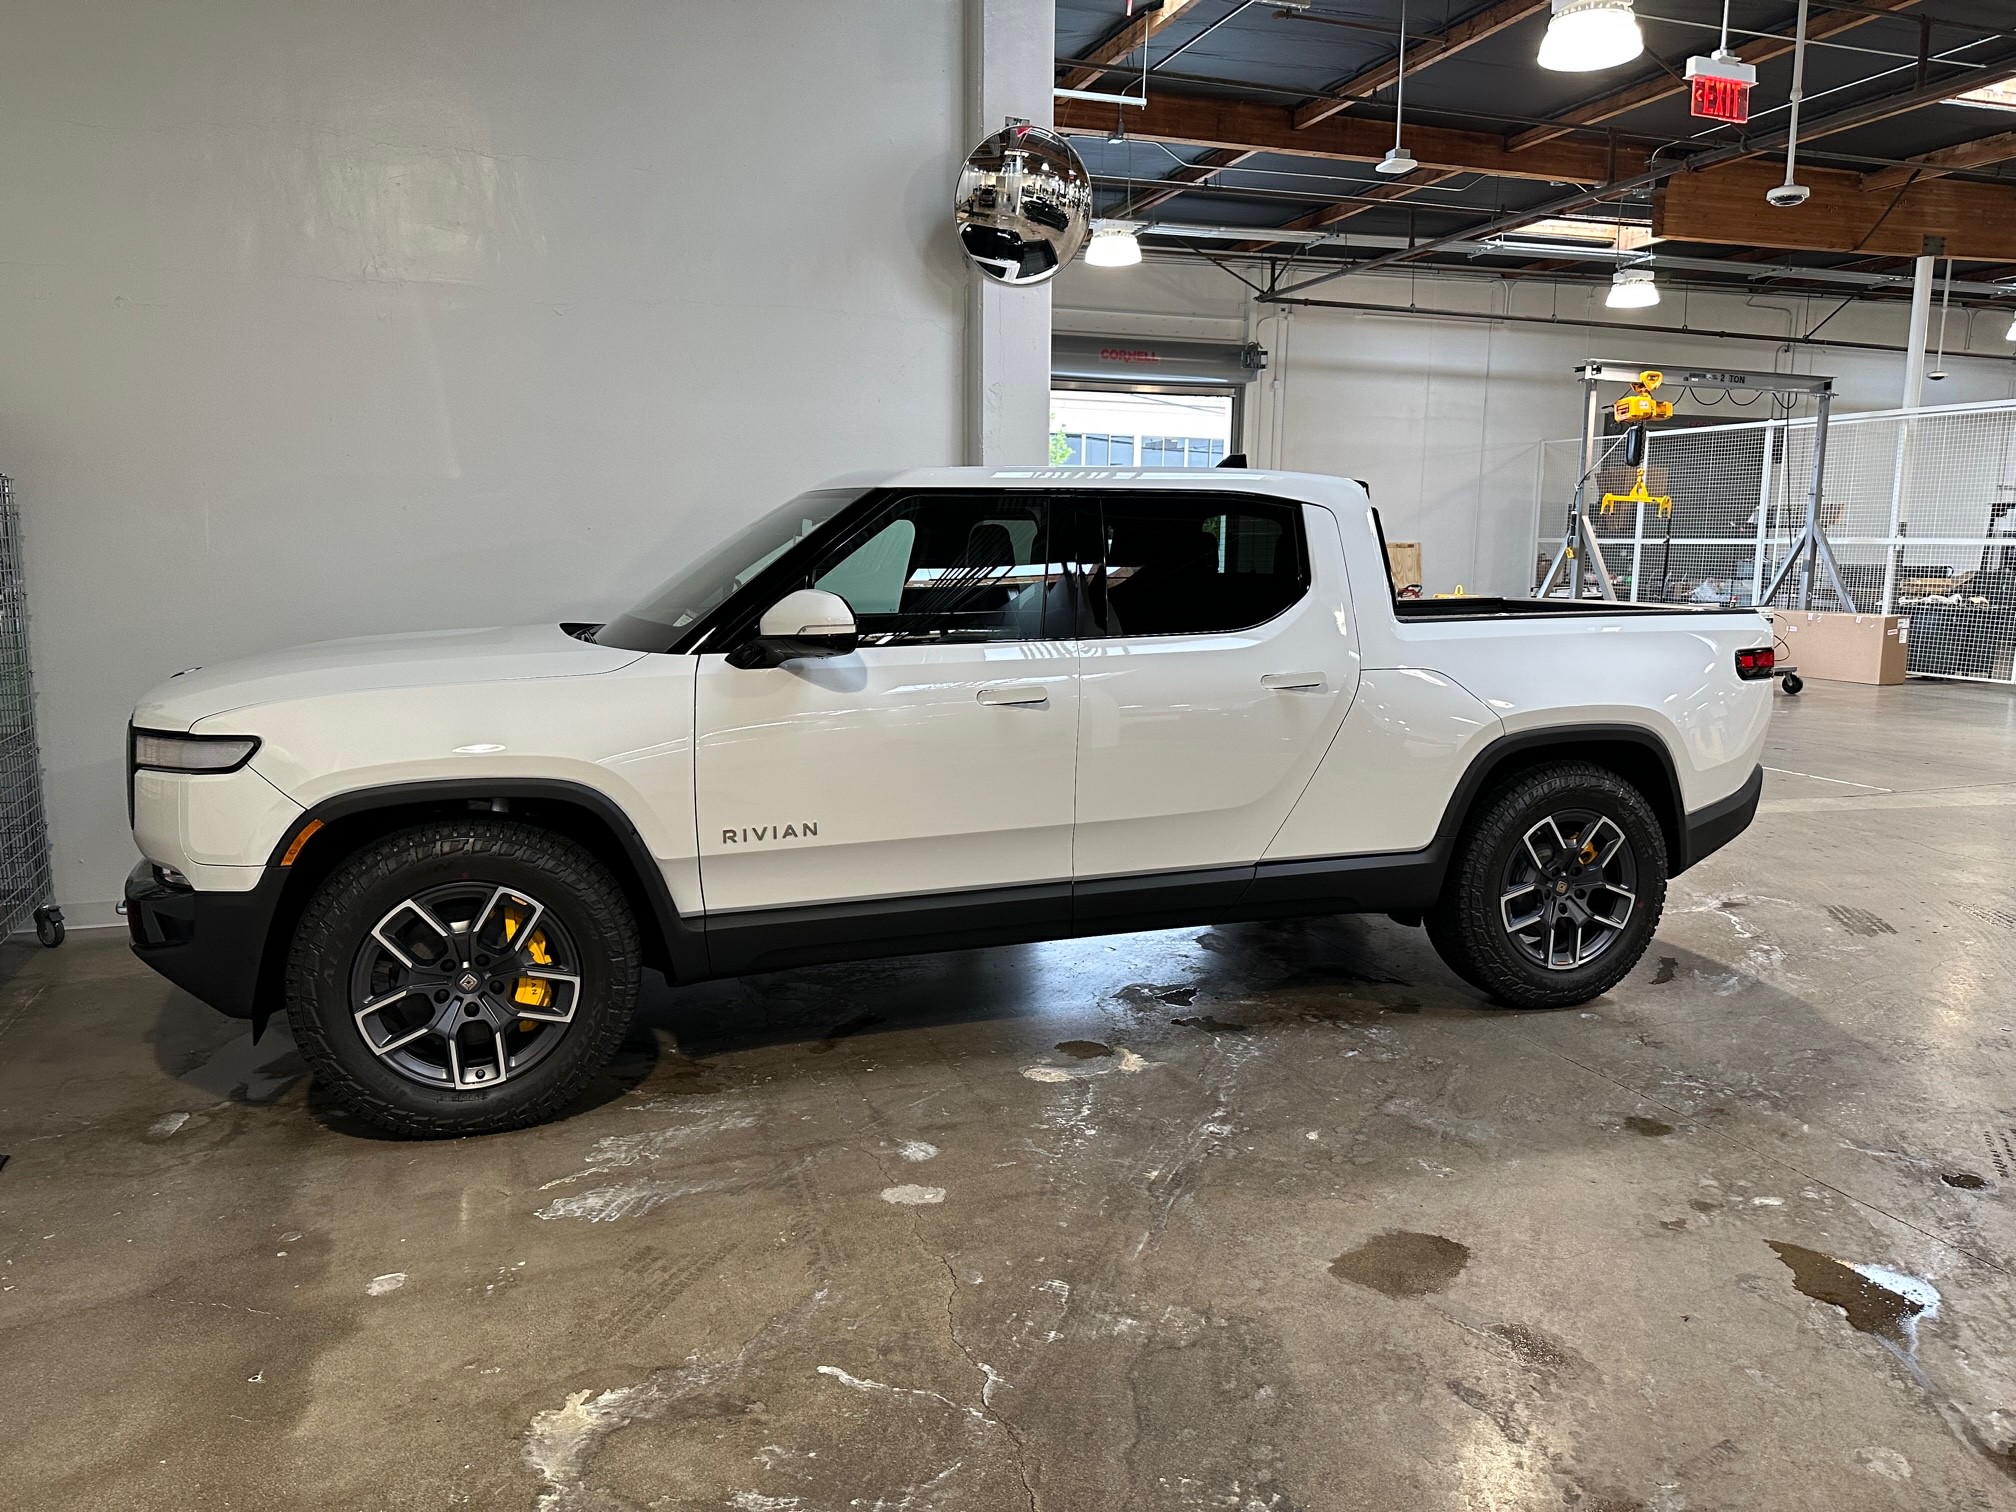 Rivian R1T R1S I need community help on color choice🤔Update: El Cap for the win listeneradb91823-df26-4975-a981-b674ab434272